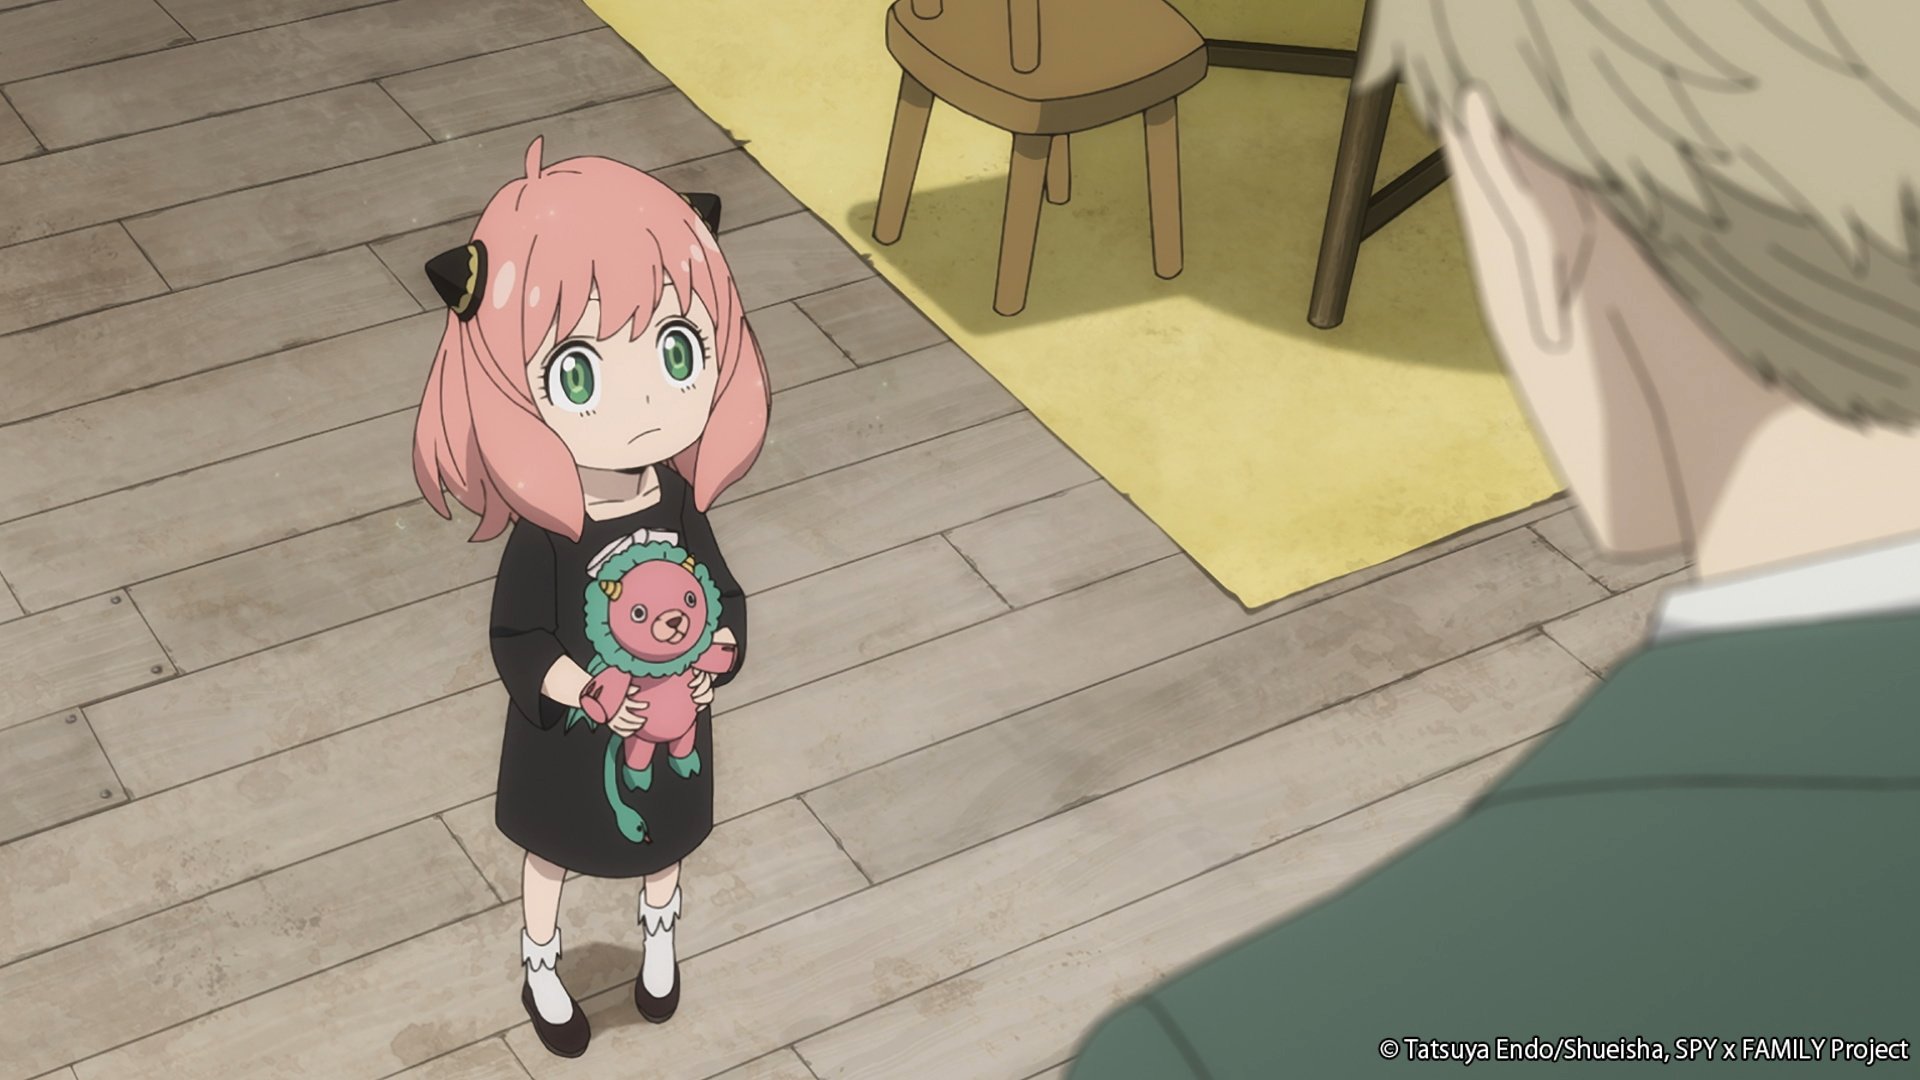 Anya and Loid in episode 1 of 'Spy x Family.' The two are staring at one another while she holds a stuffed lion.